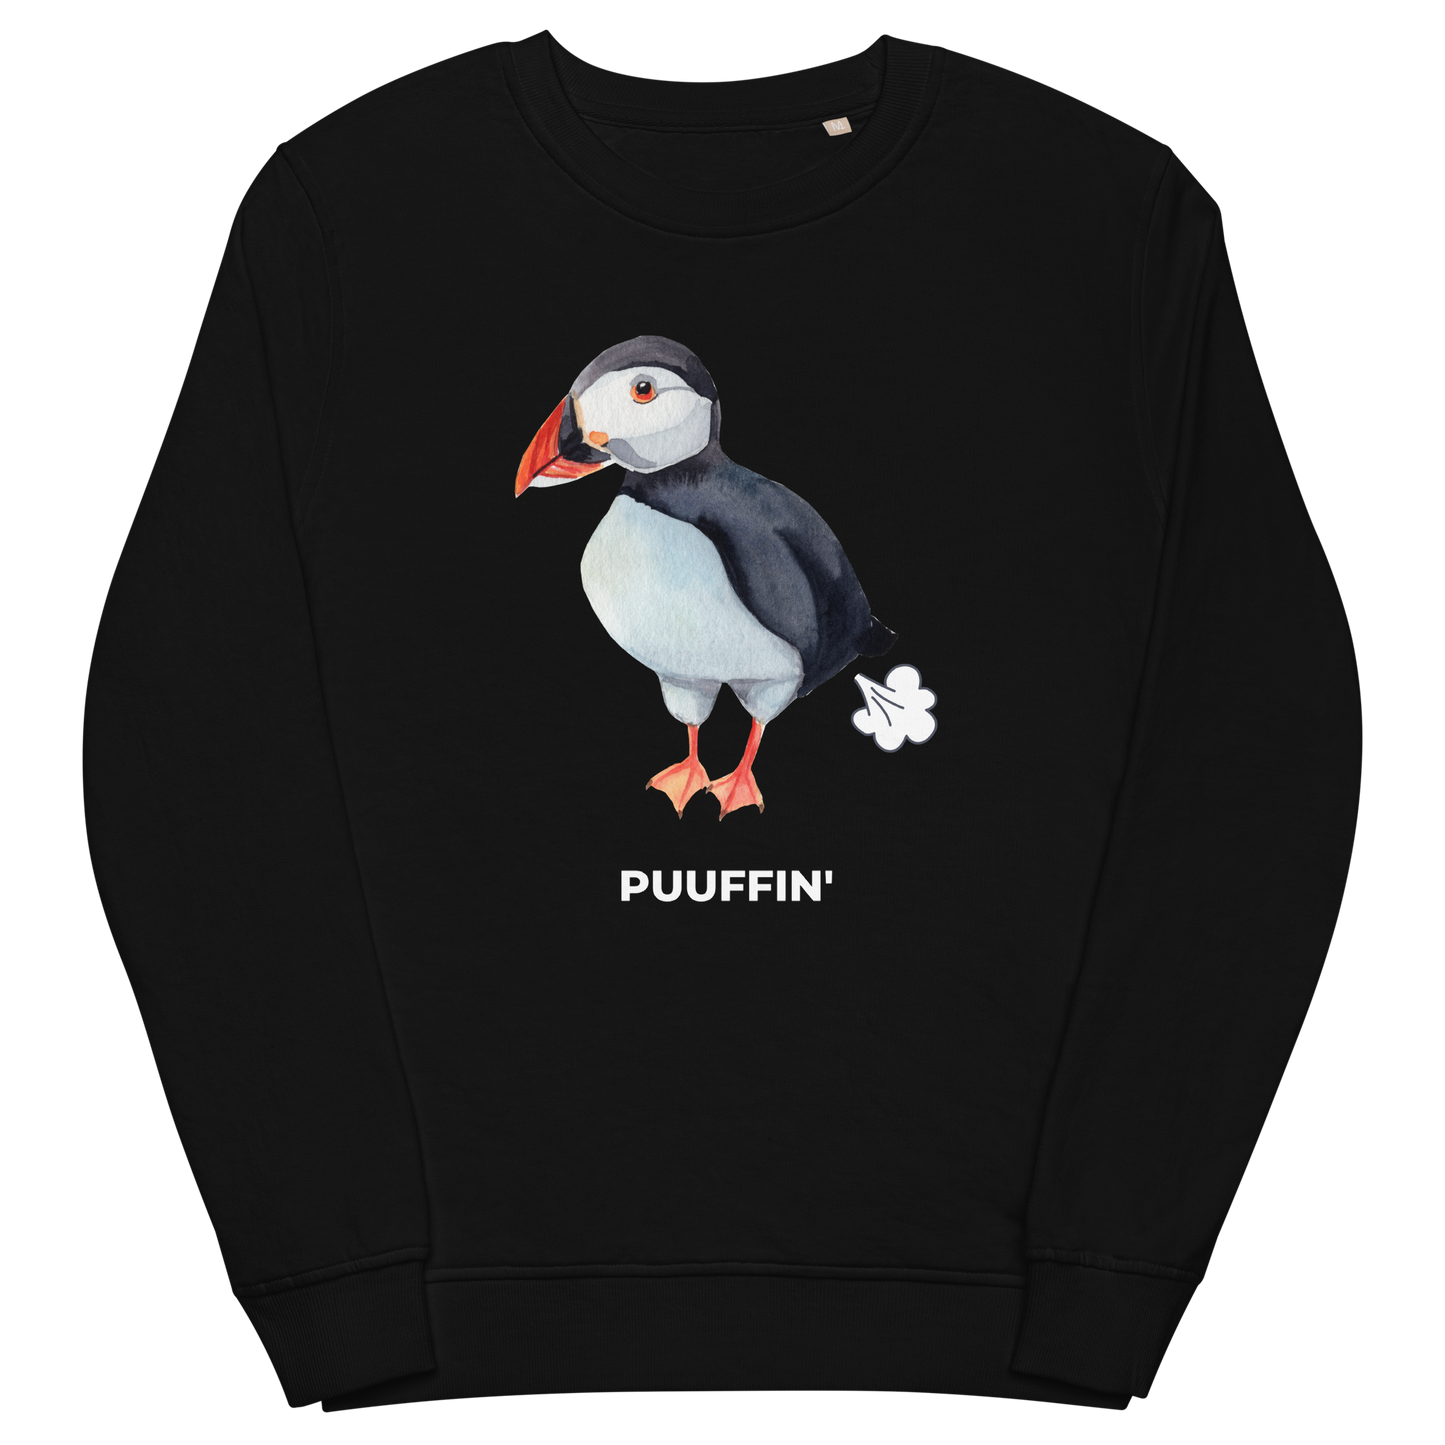 Black Organic Cotton Puffin Sweatshirt featuring a comic Puuffin' graphic on the chest - Funny Graphic Puffin Sweatshirts - Boozy Fox